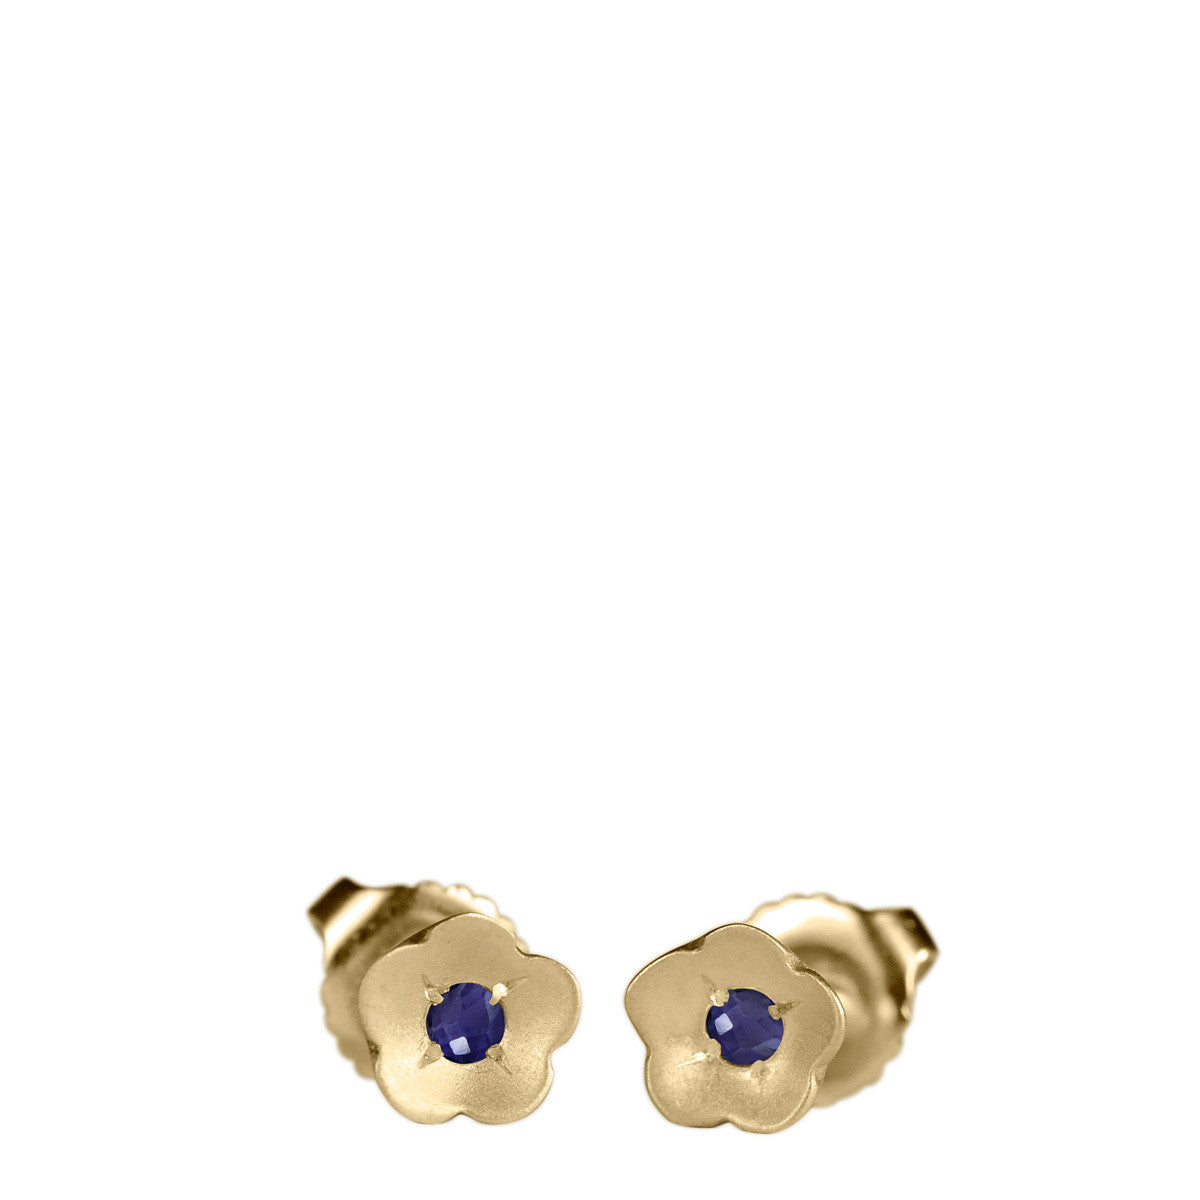 10K Gold Buttercup Stud Earrings with Iolite